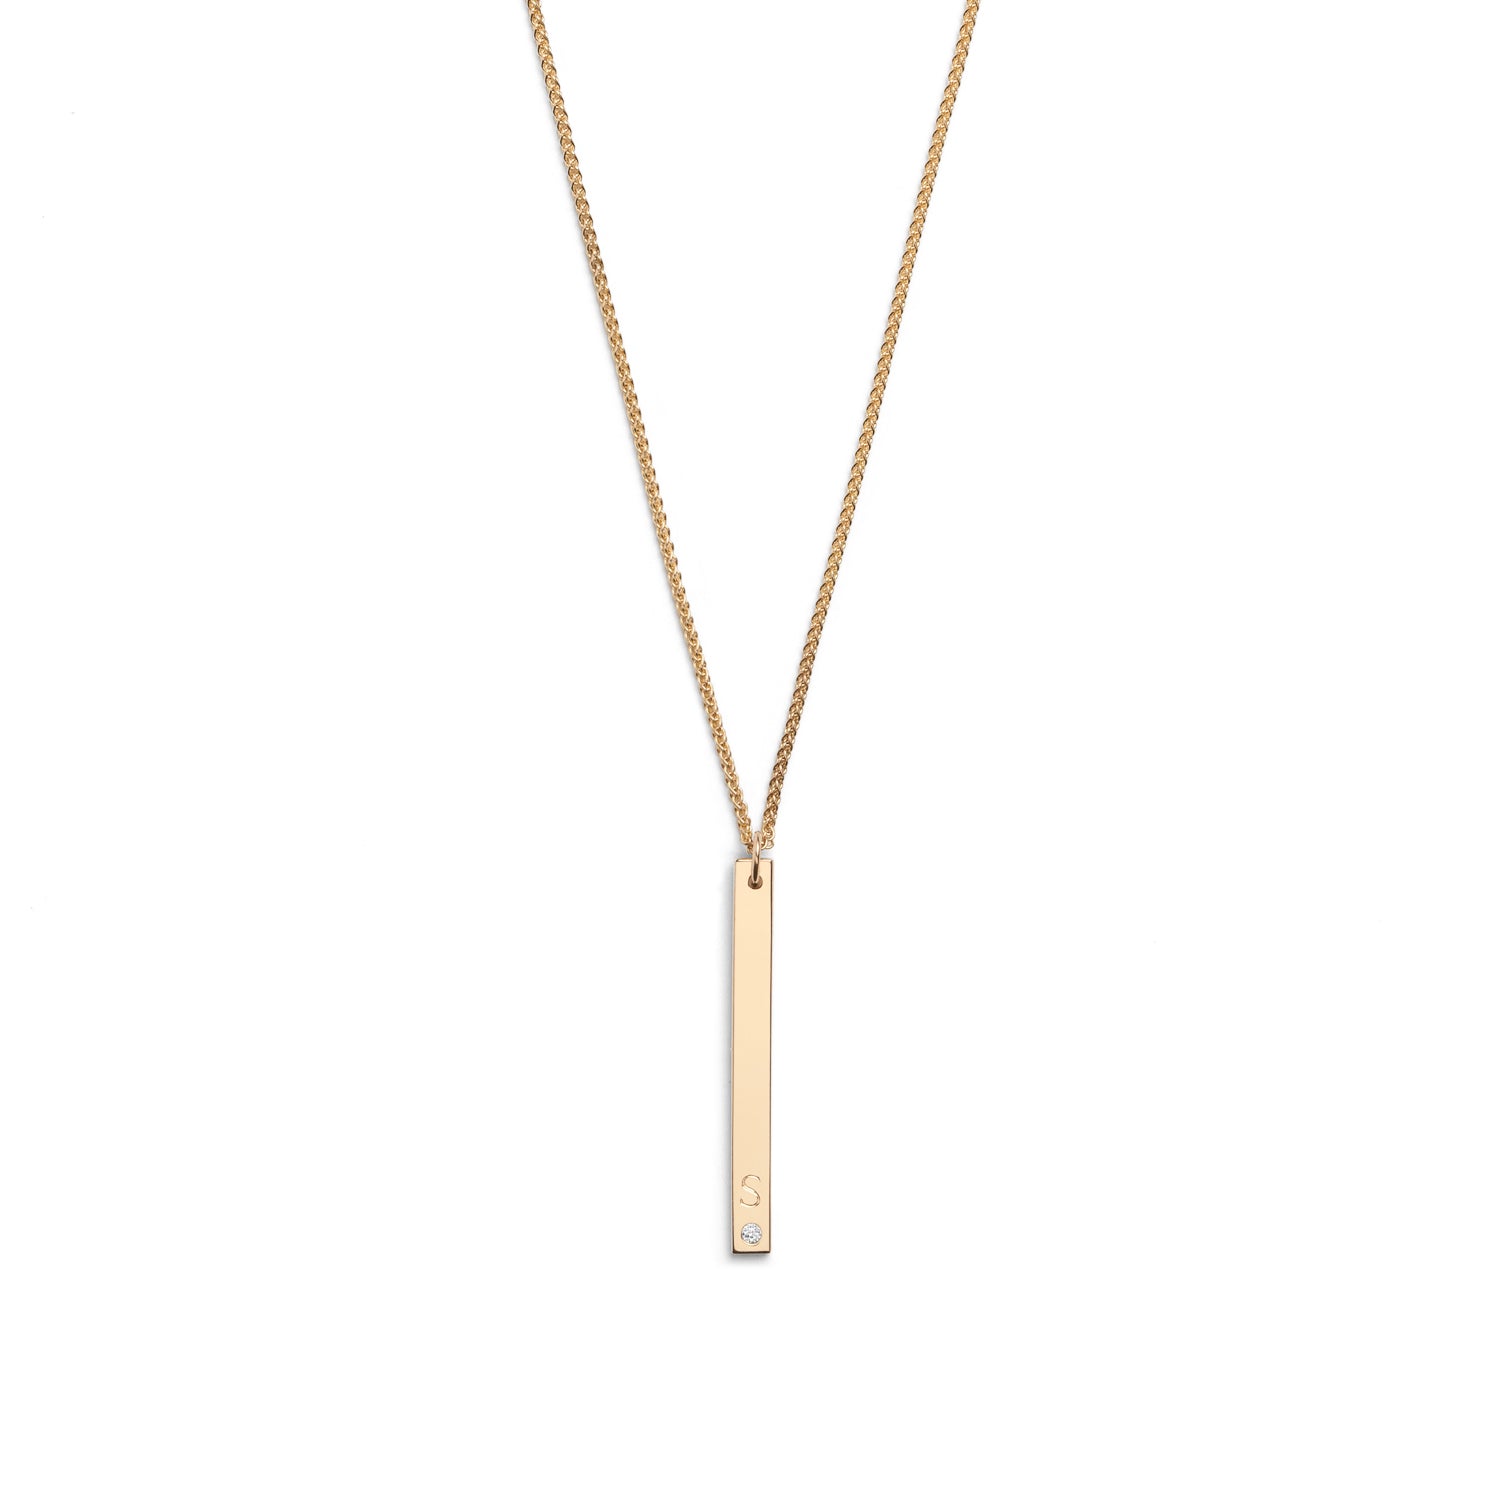 Selin Kent 14K Gaia Vertical Necklace with One White Diamond